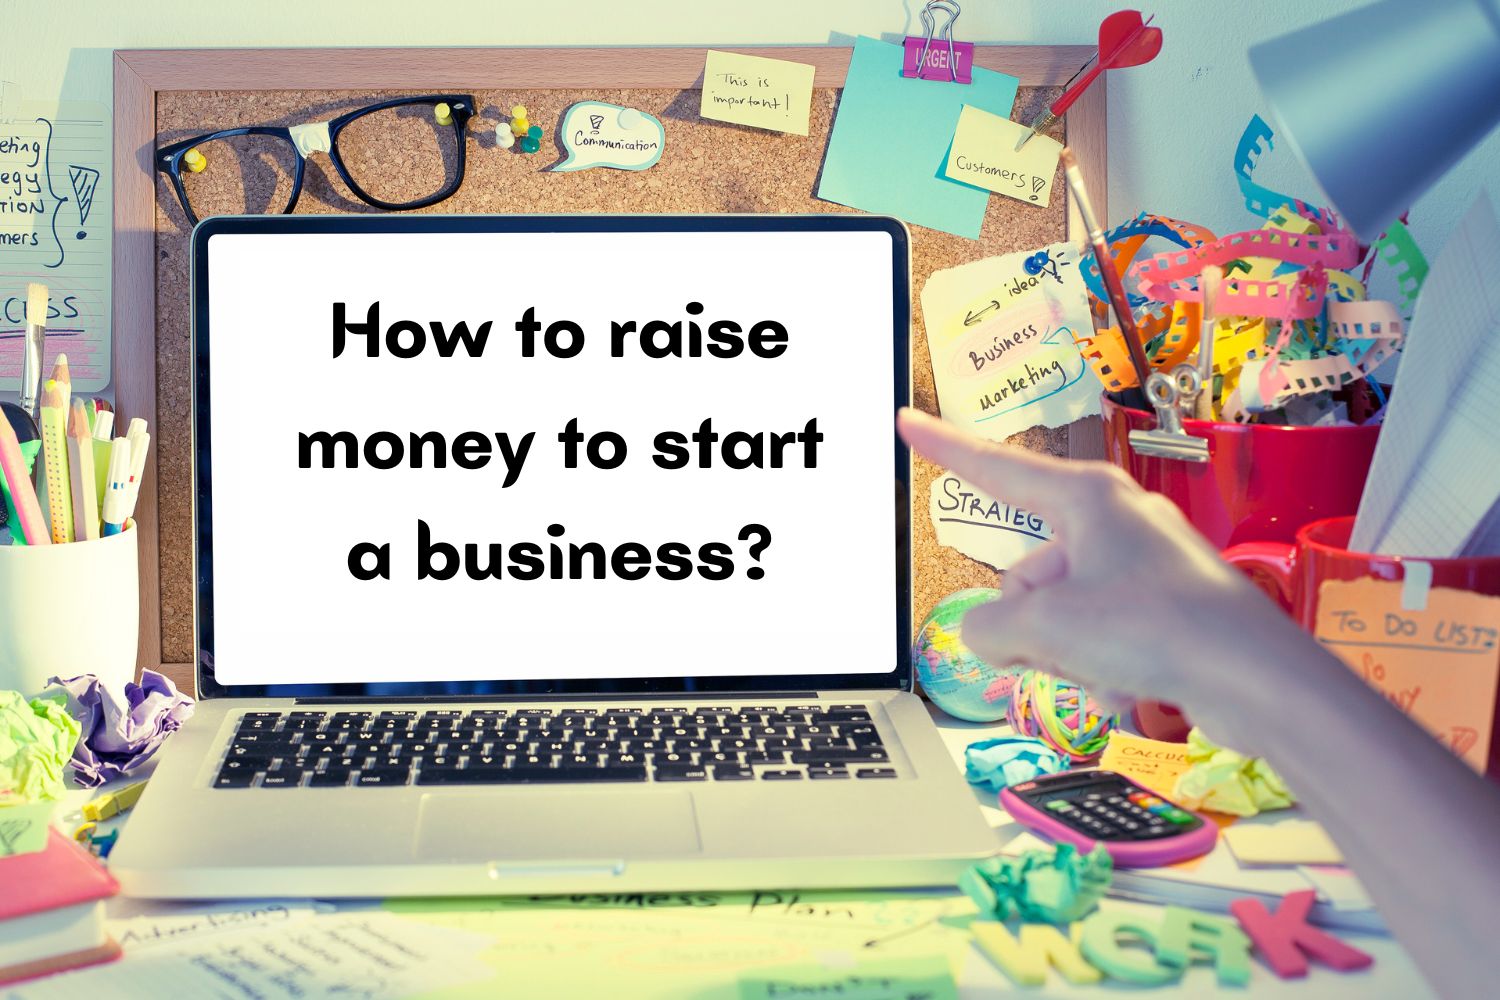 How to raise money to start a business?